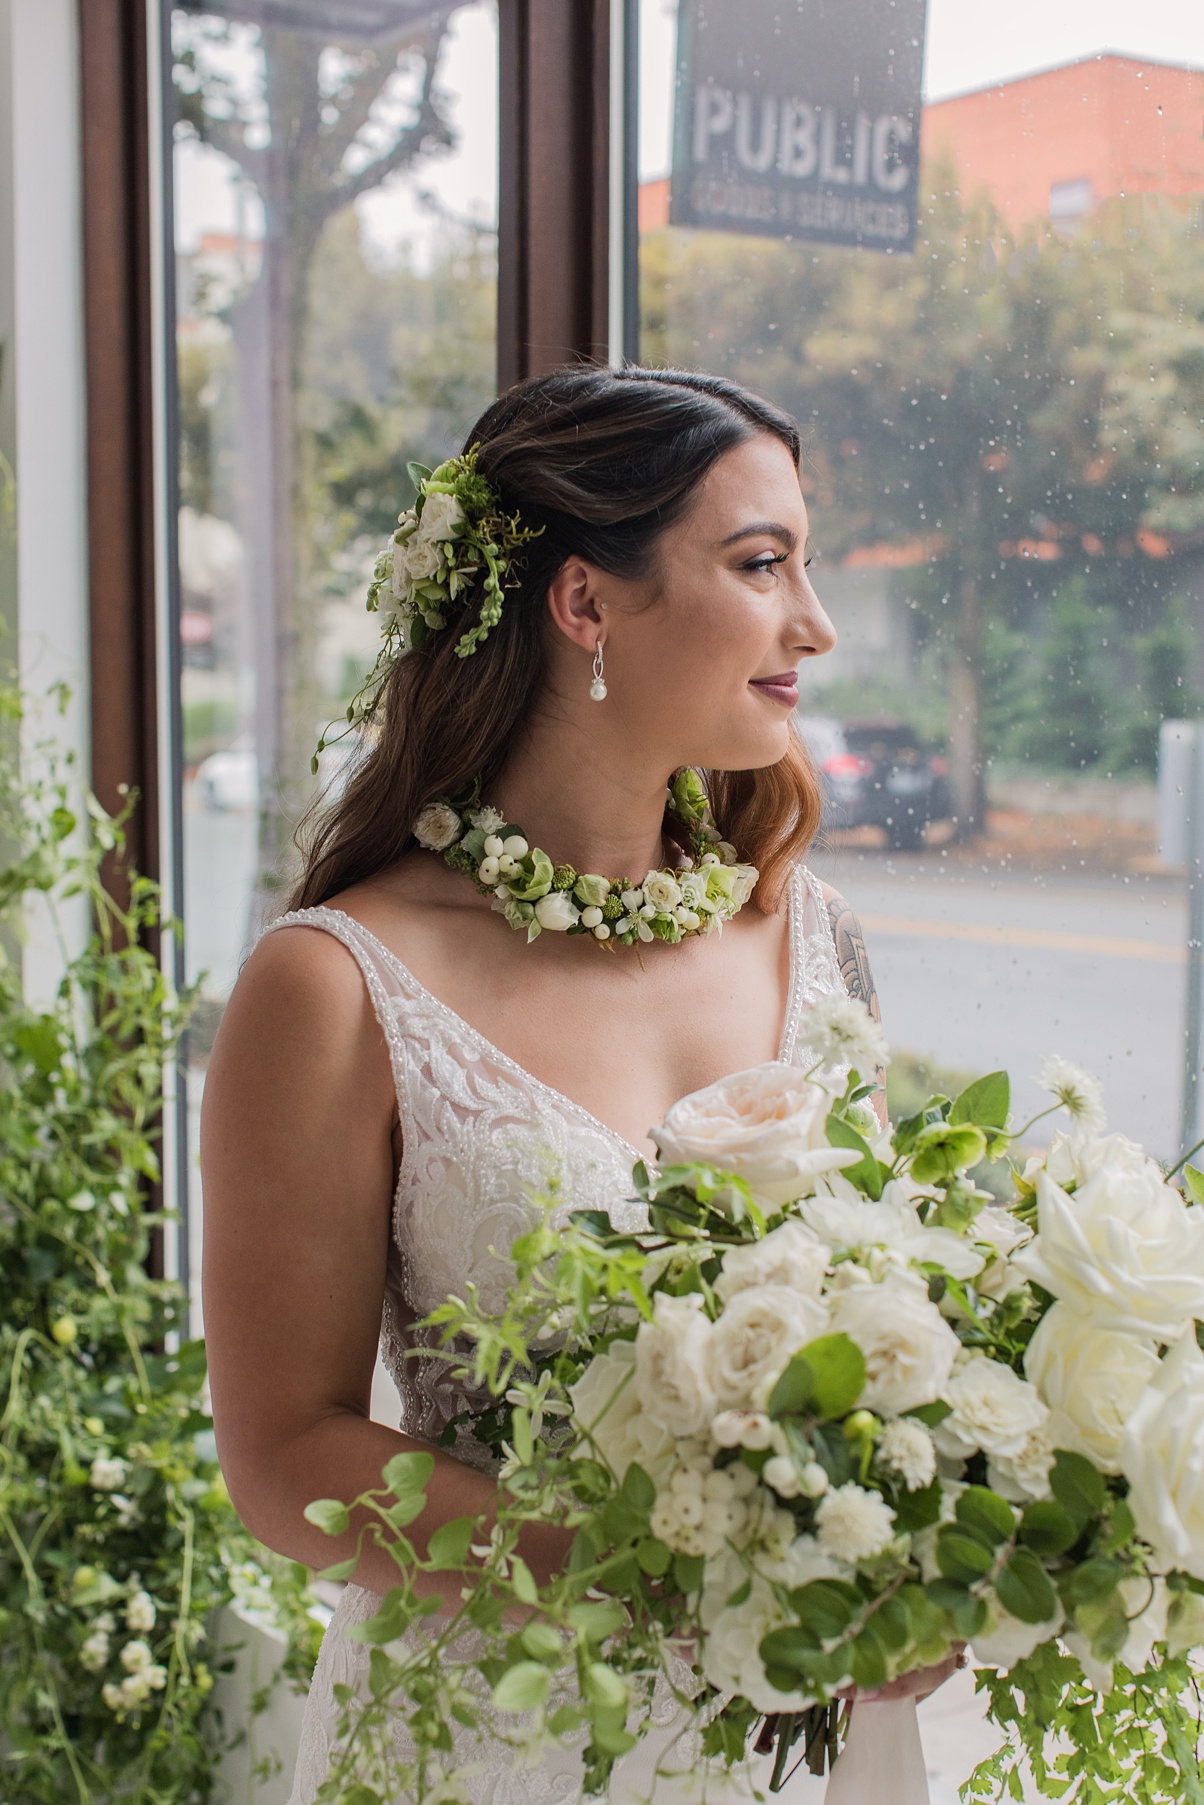 Bride holding white bouquet and looking out window